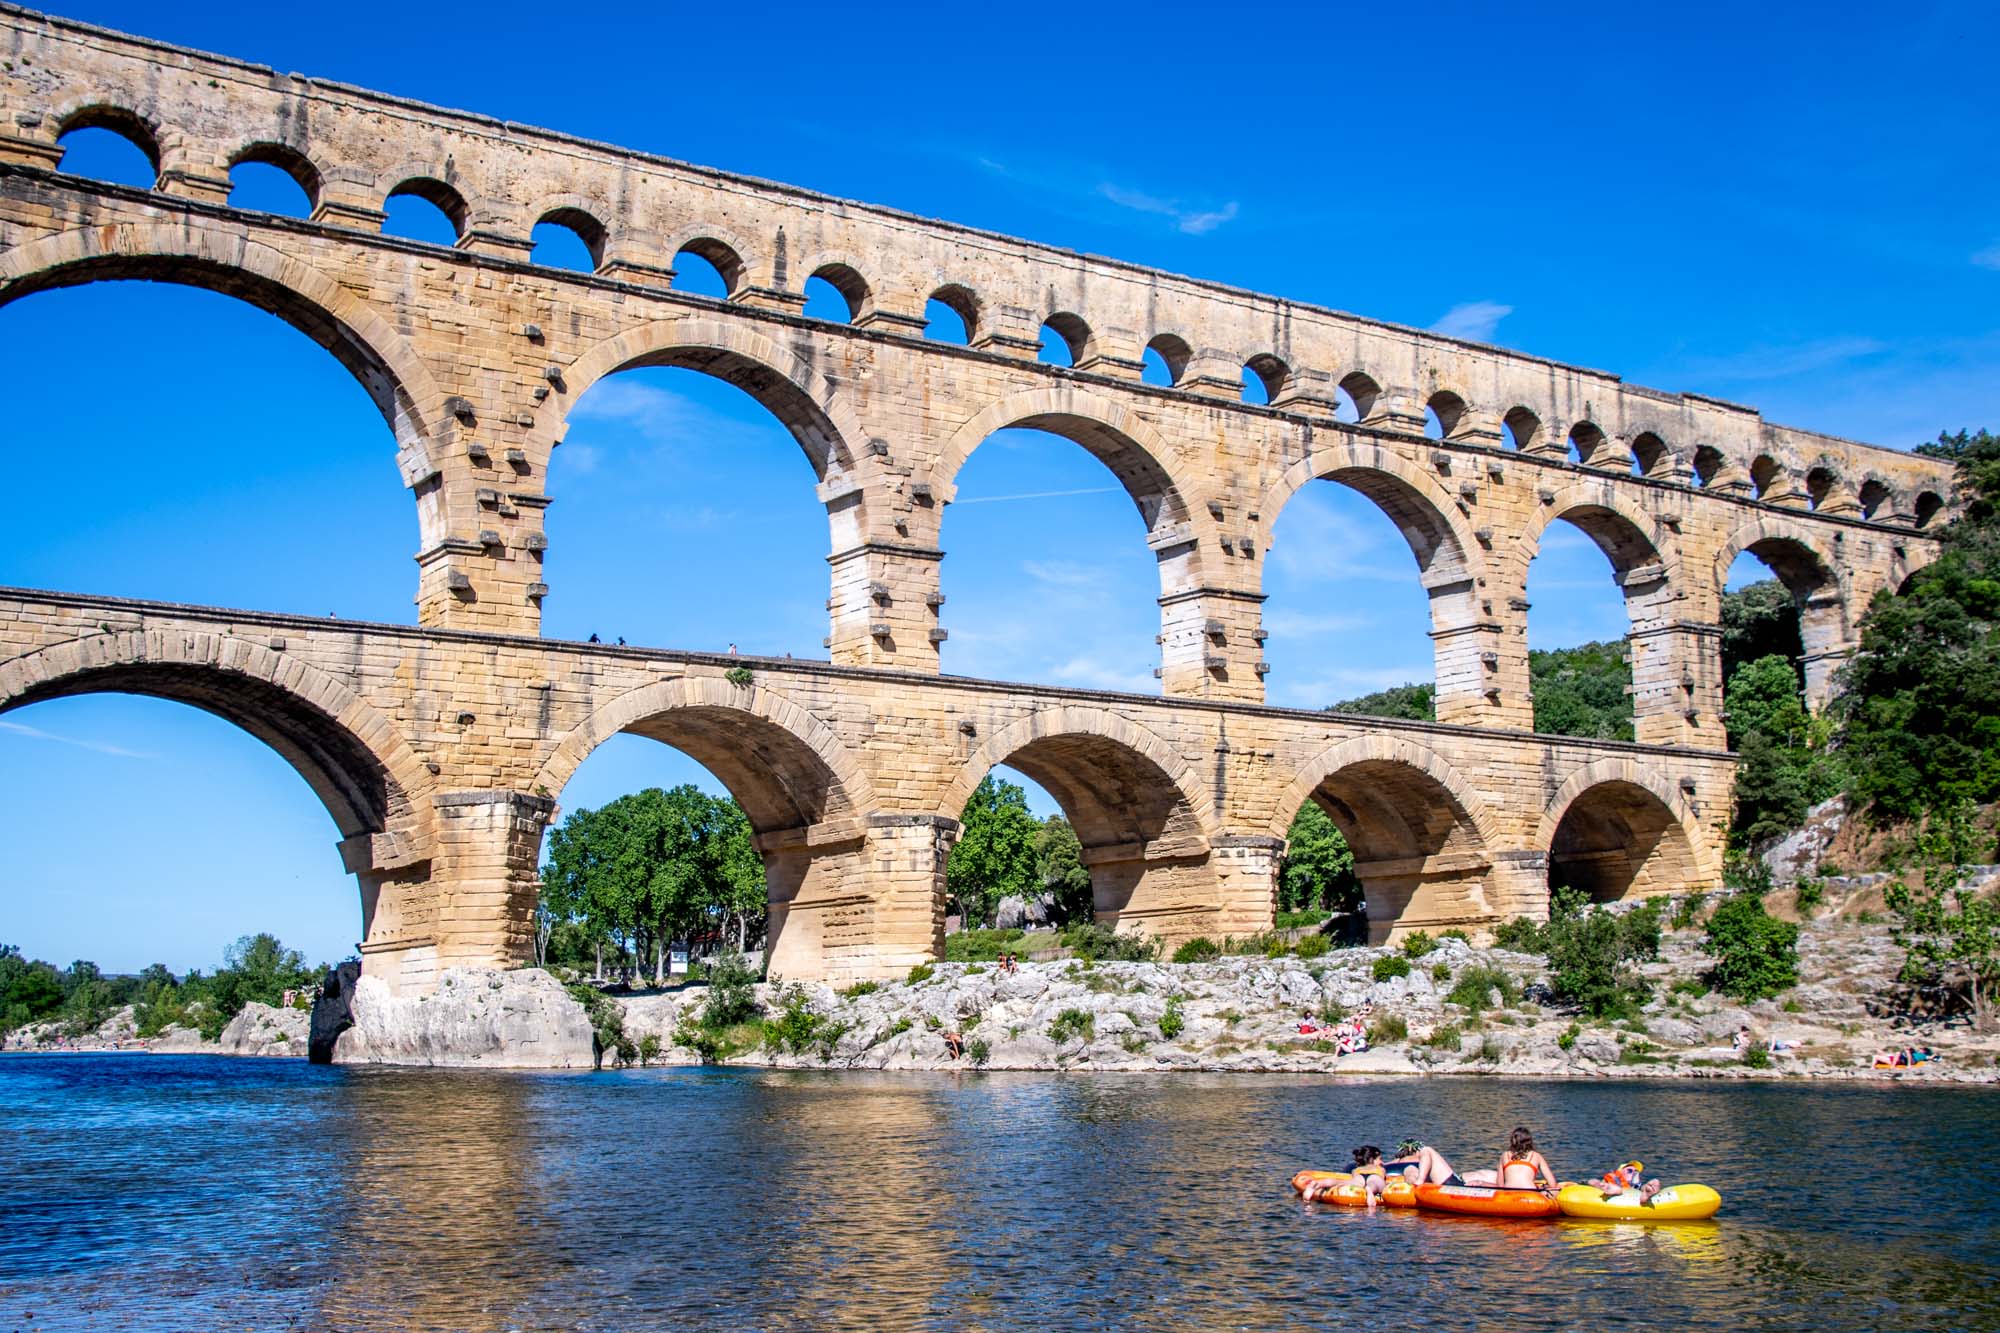 Three-level ancient Roman aqueduct towering over a river with people in a raft